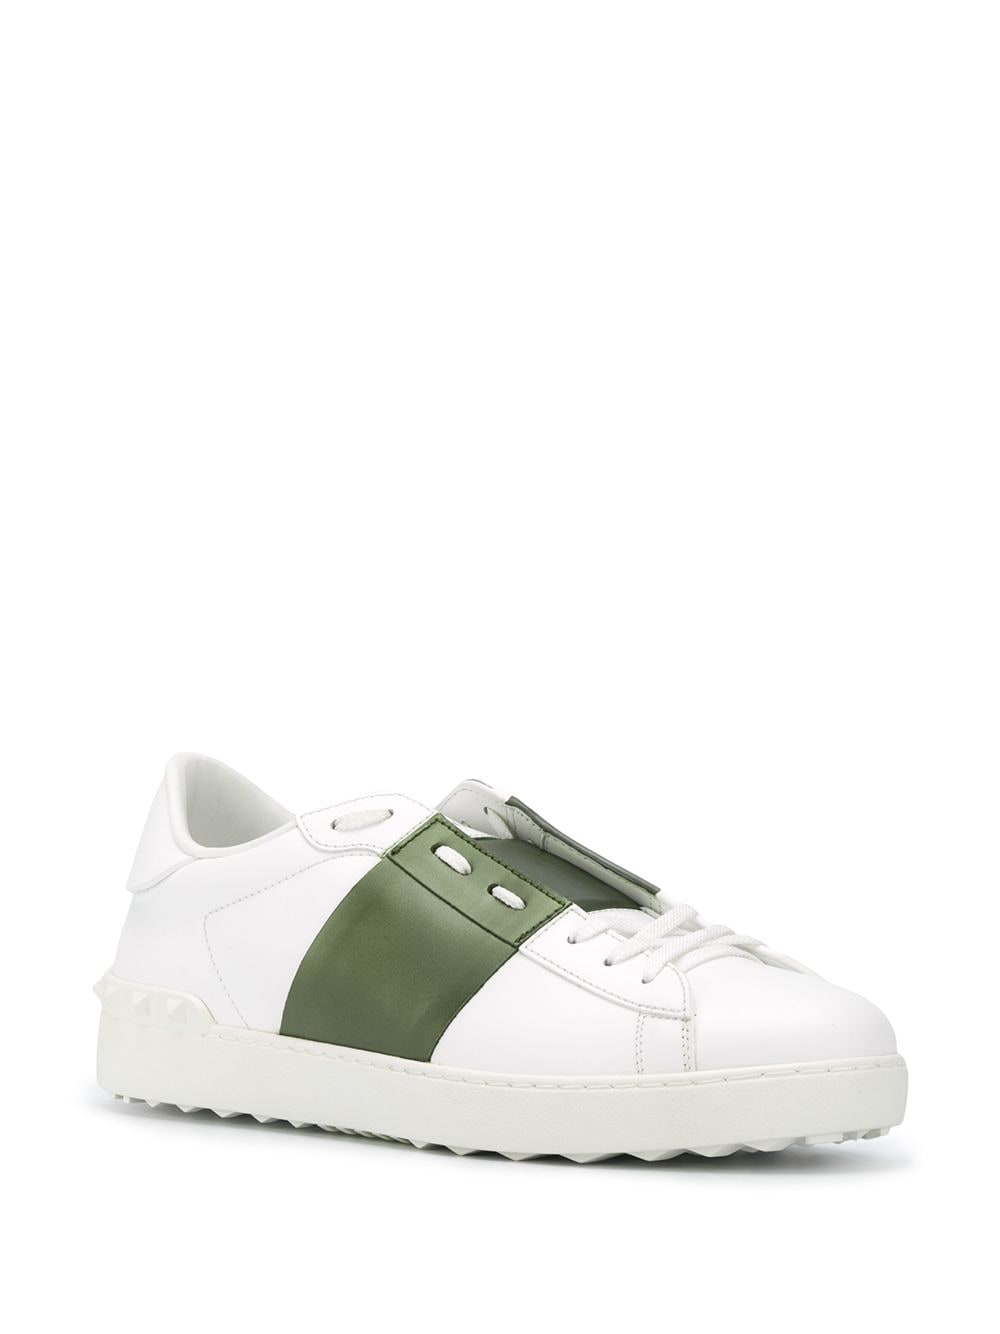 valentino open leather sneakers